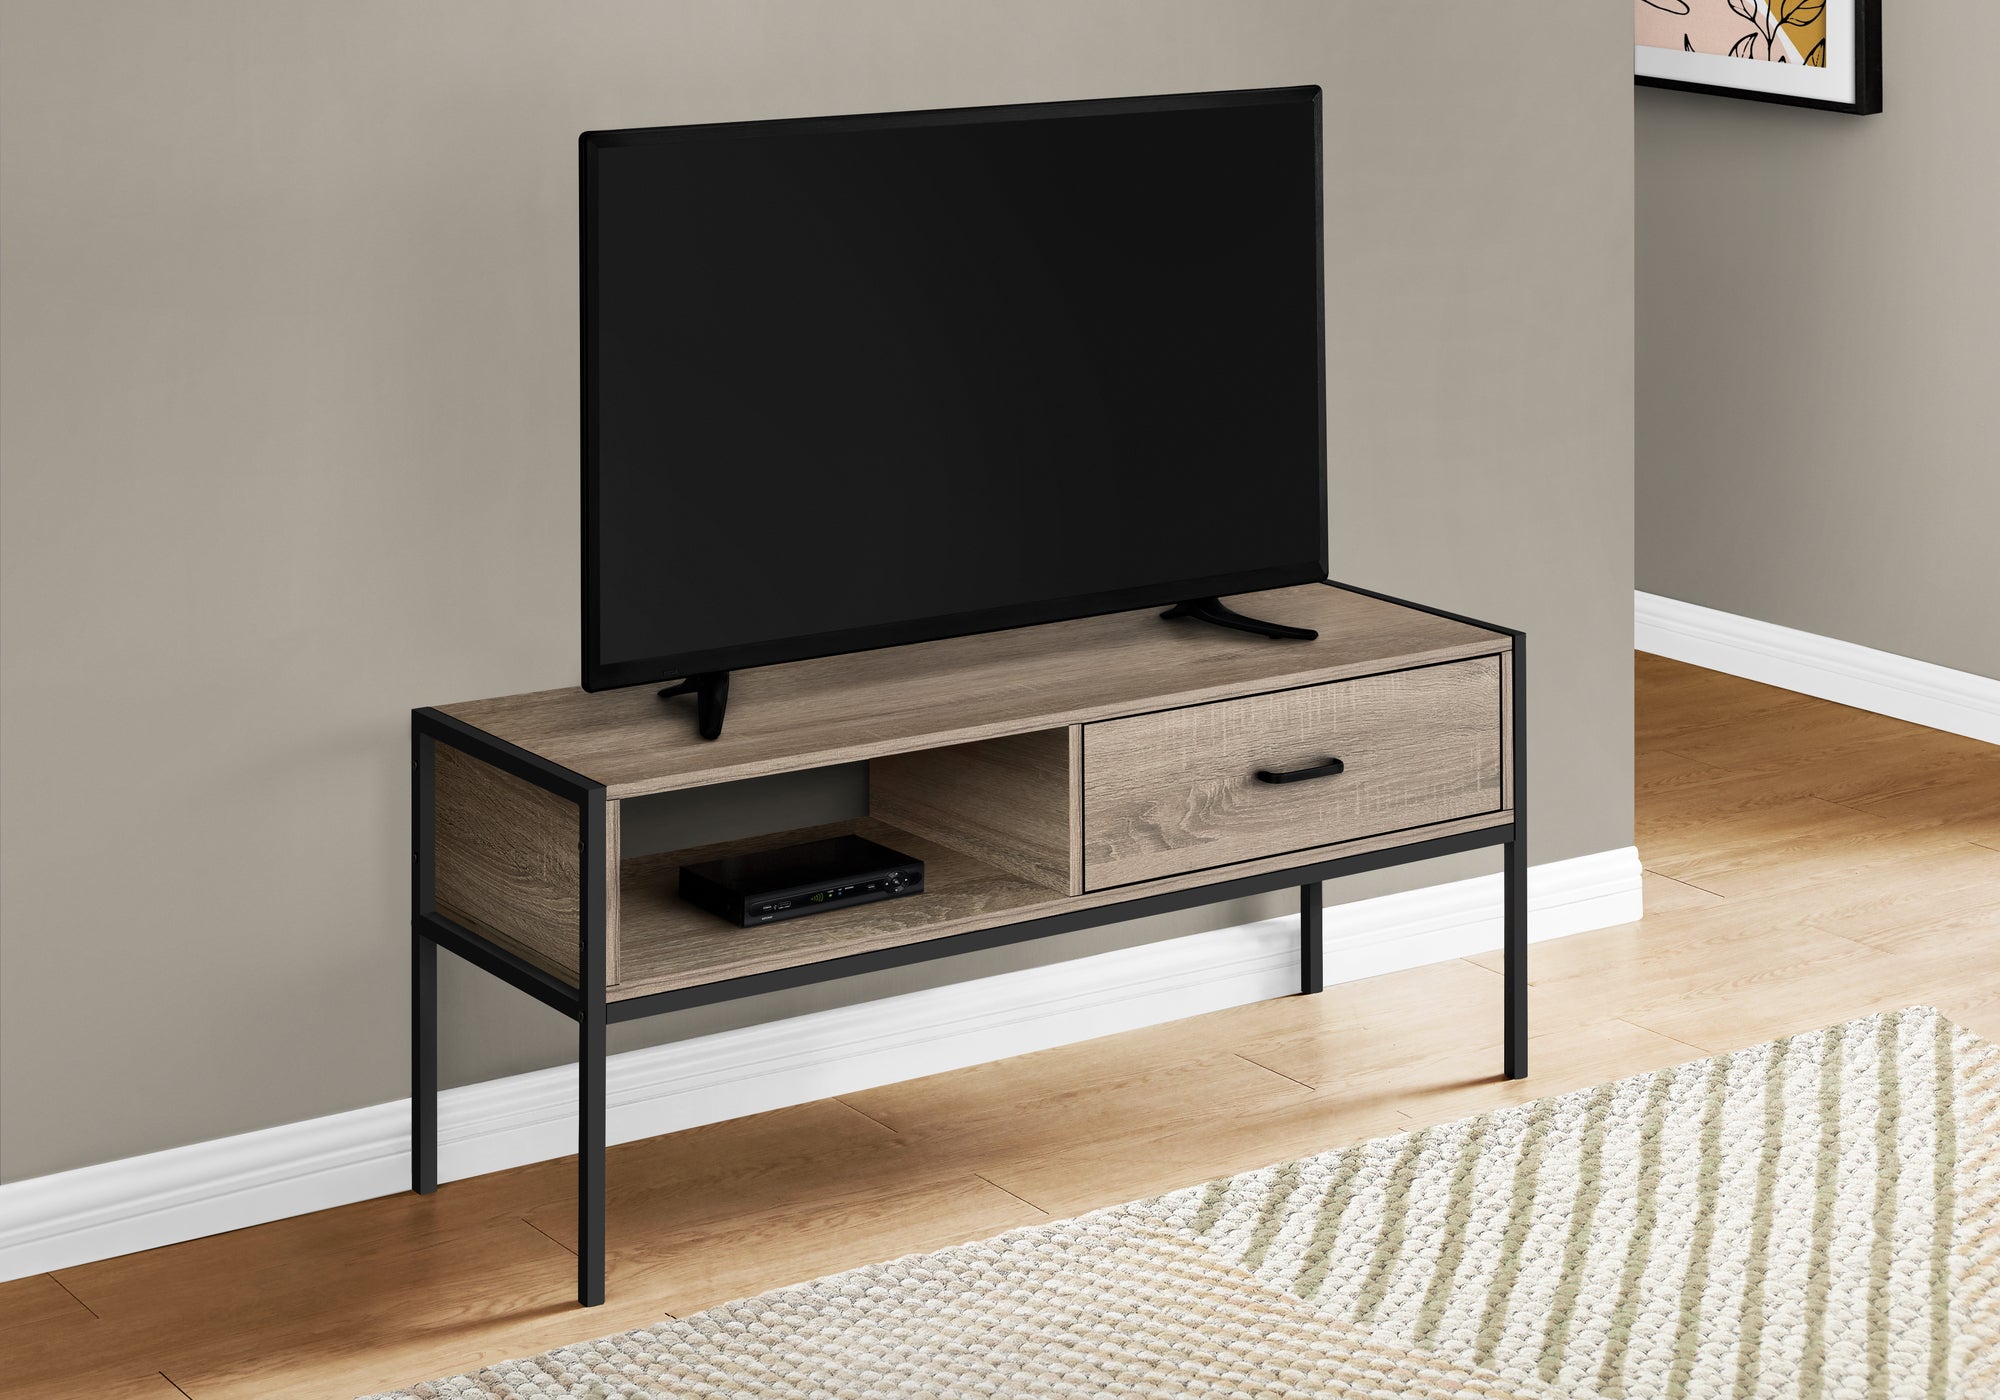 I 2876 - TV STAND - 48"L / DARK TAUPE / BLACK METAL BY MONARCH SPECIALTIES INC